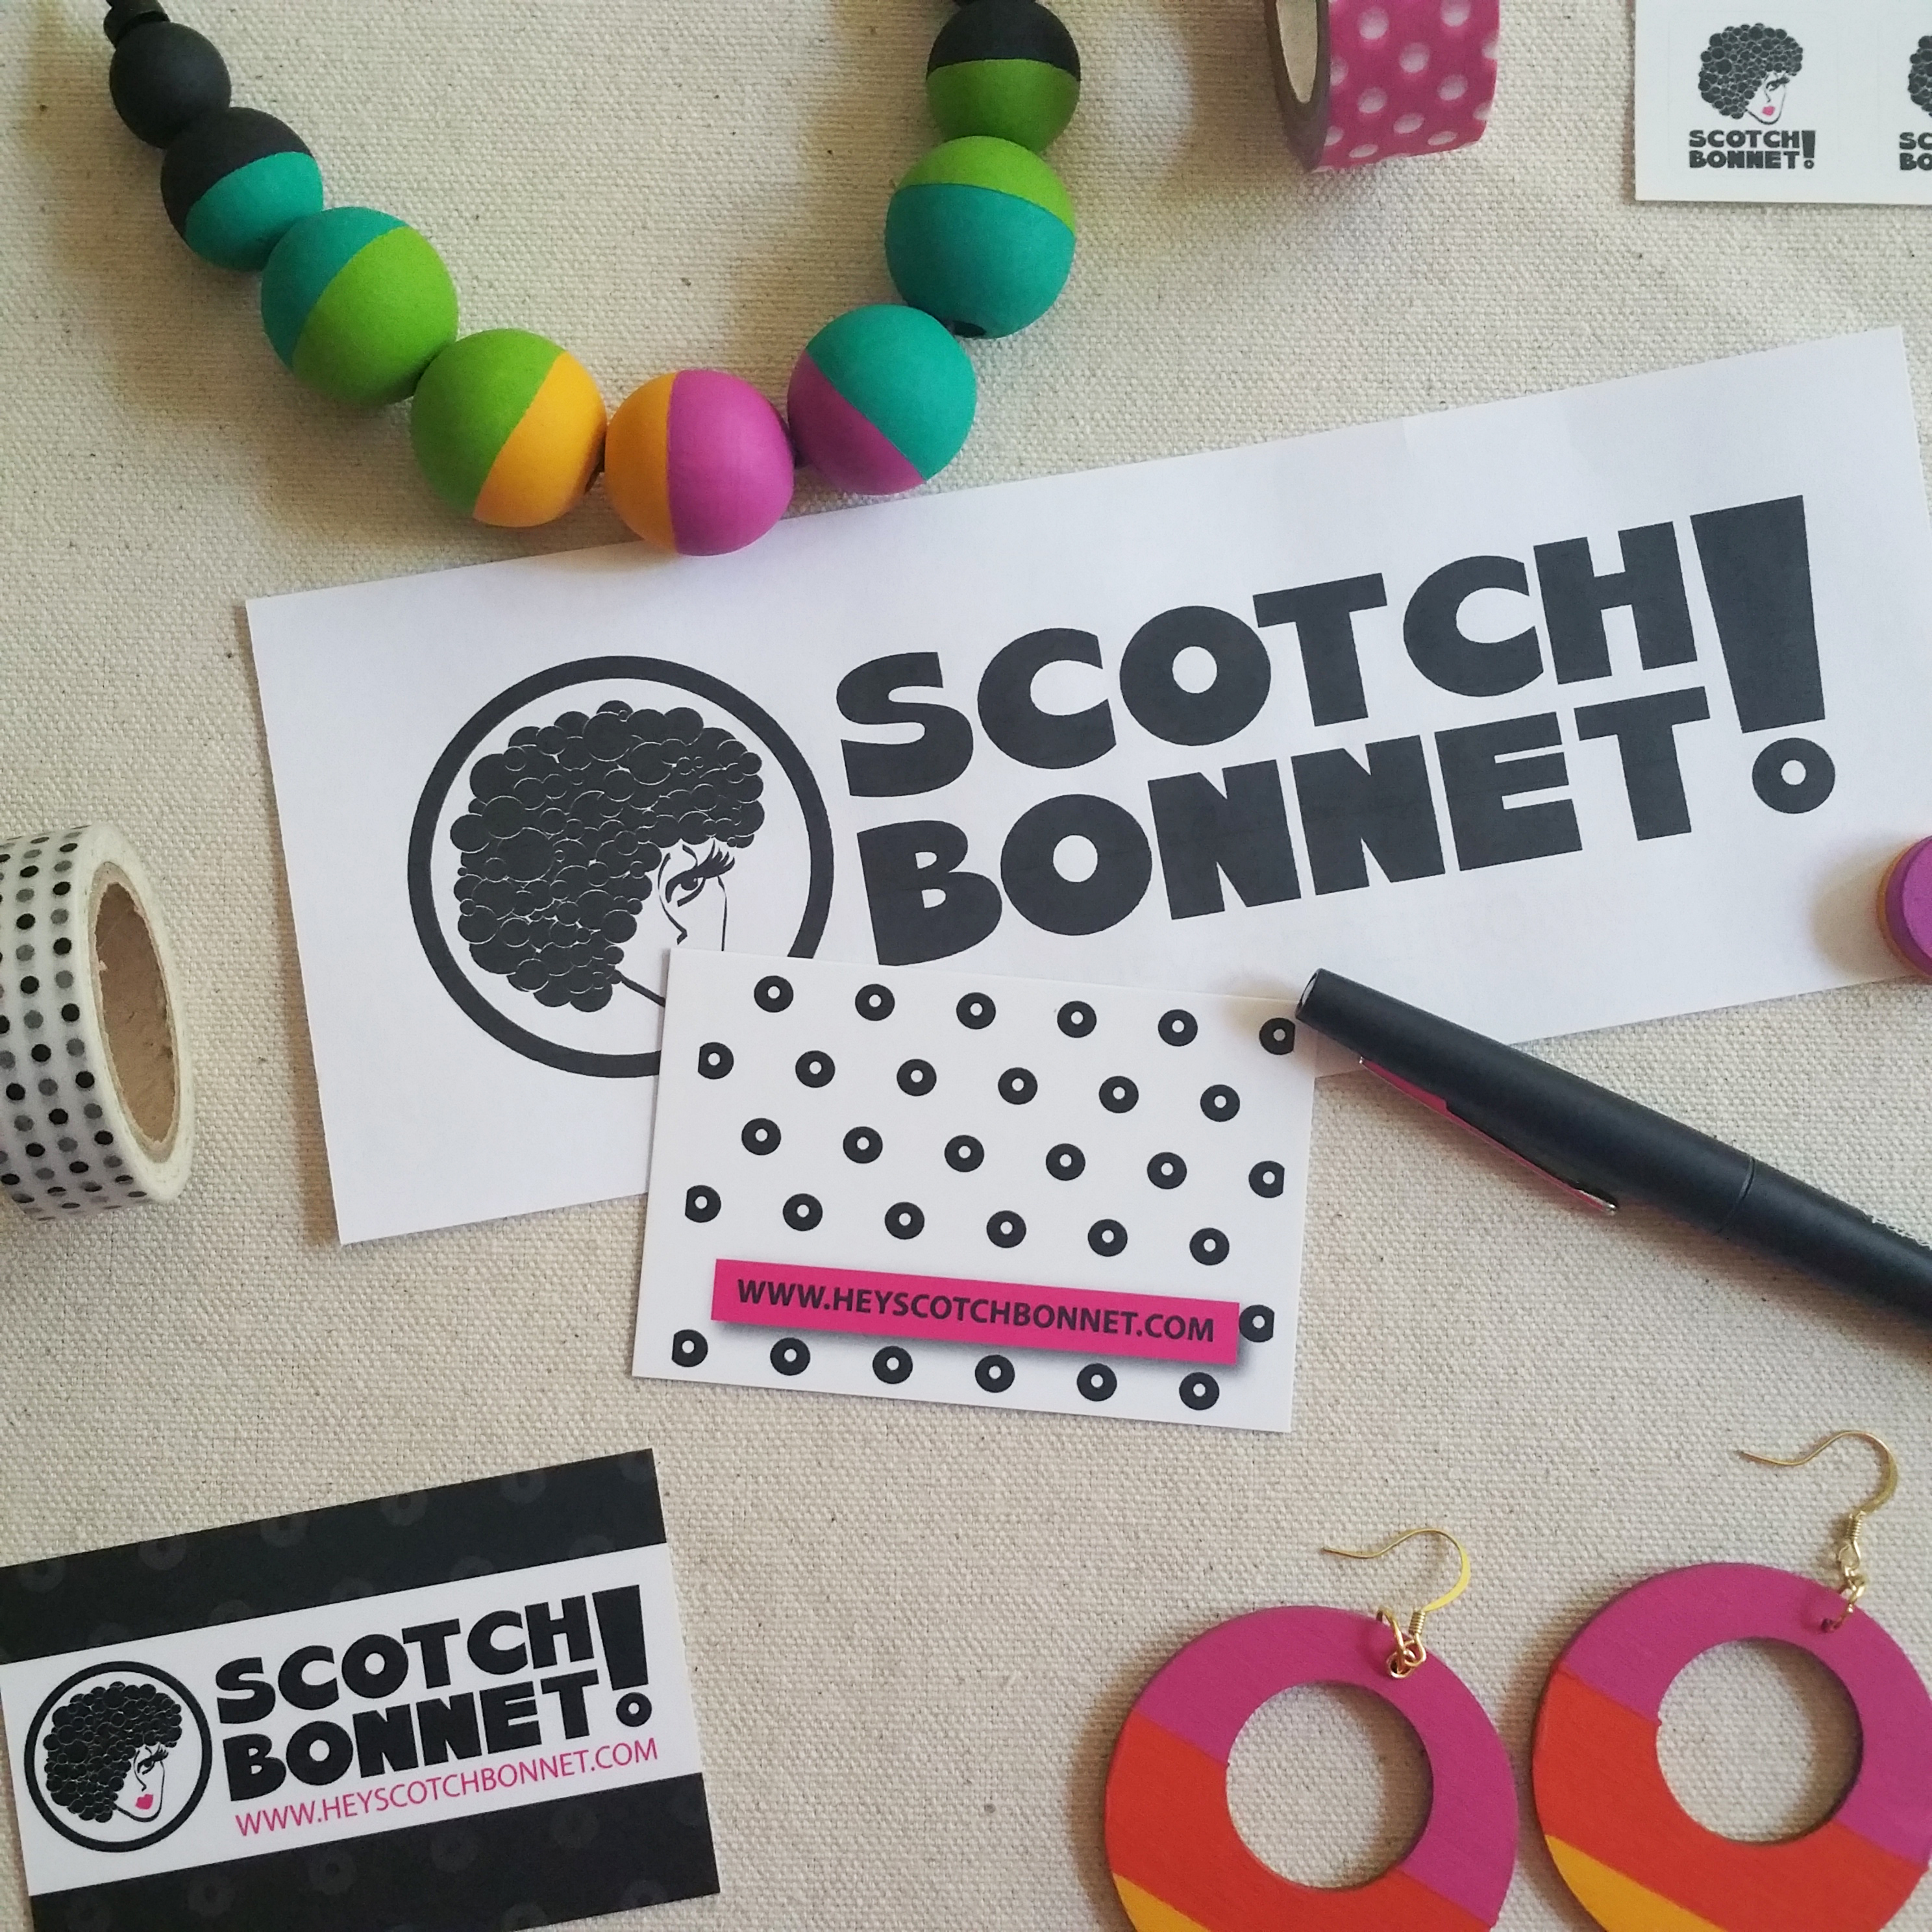 bye-bye-summer-scotchbonnet-bold-and-colorful-handmade-jewelry-new-branding